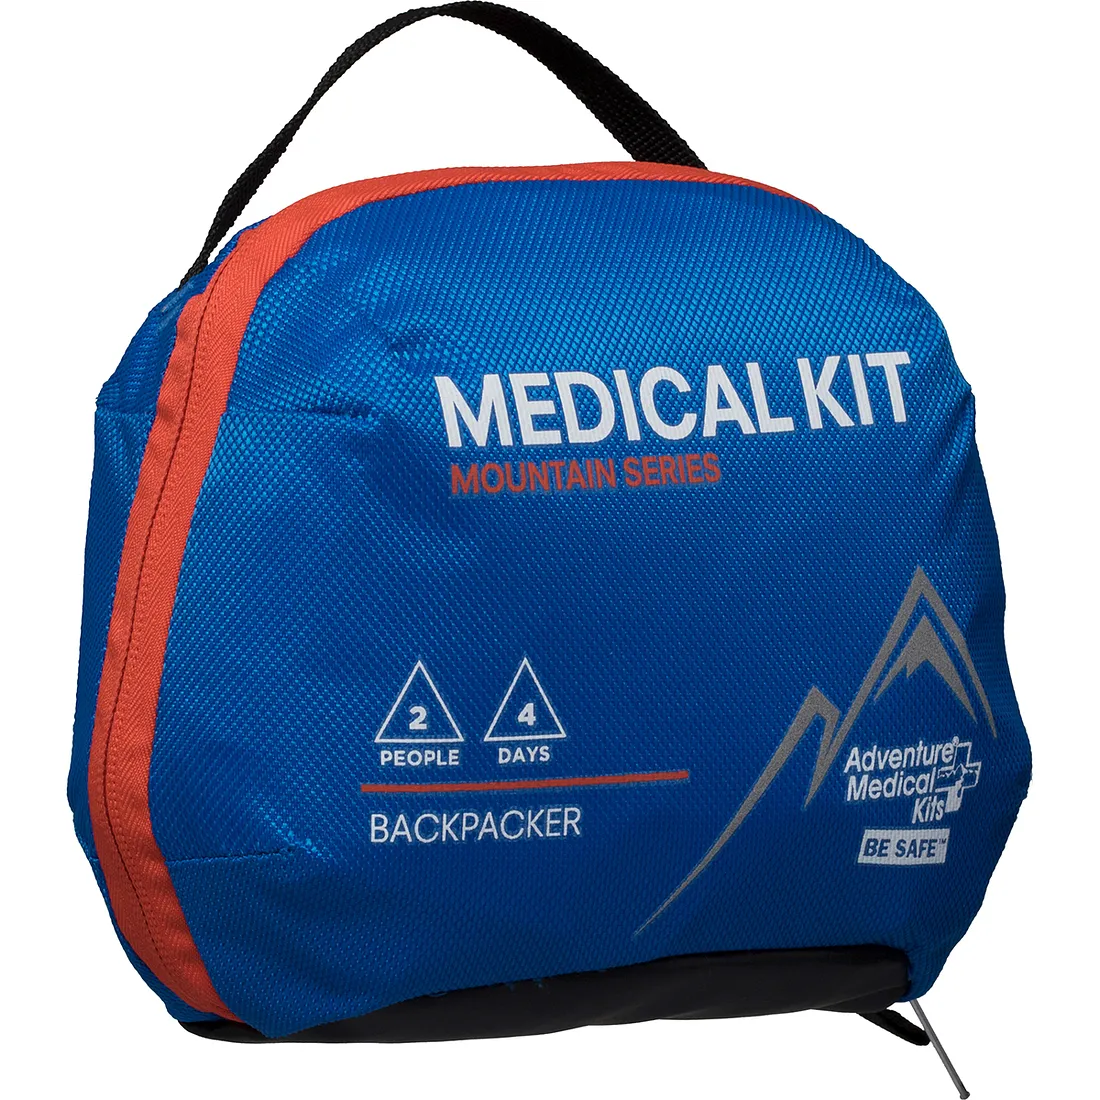 Adventure Medical Kits Mountain Backpacker Kit Camping First Aid Kit